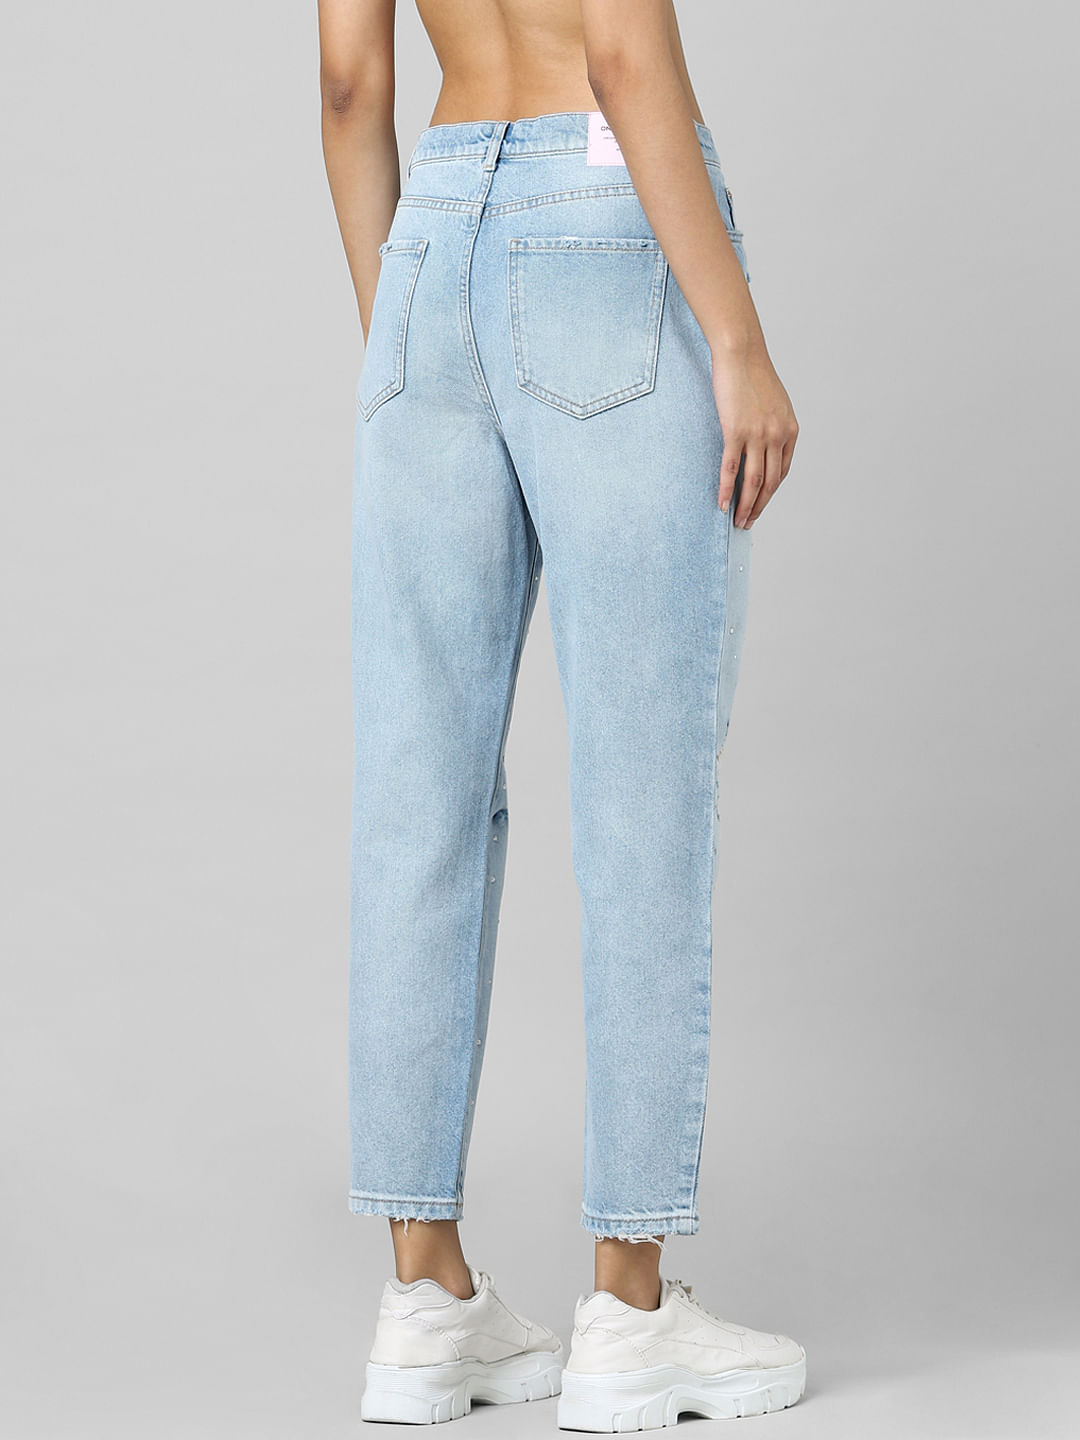 Regular M MODDY 525Ice Boyfriend Fit Stretchable Ankle-Length Women Jeans,  Button & Zip, High Rise at Rs 407/piece in New Delhi